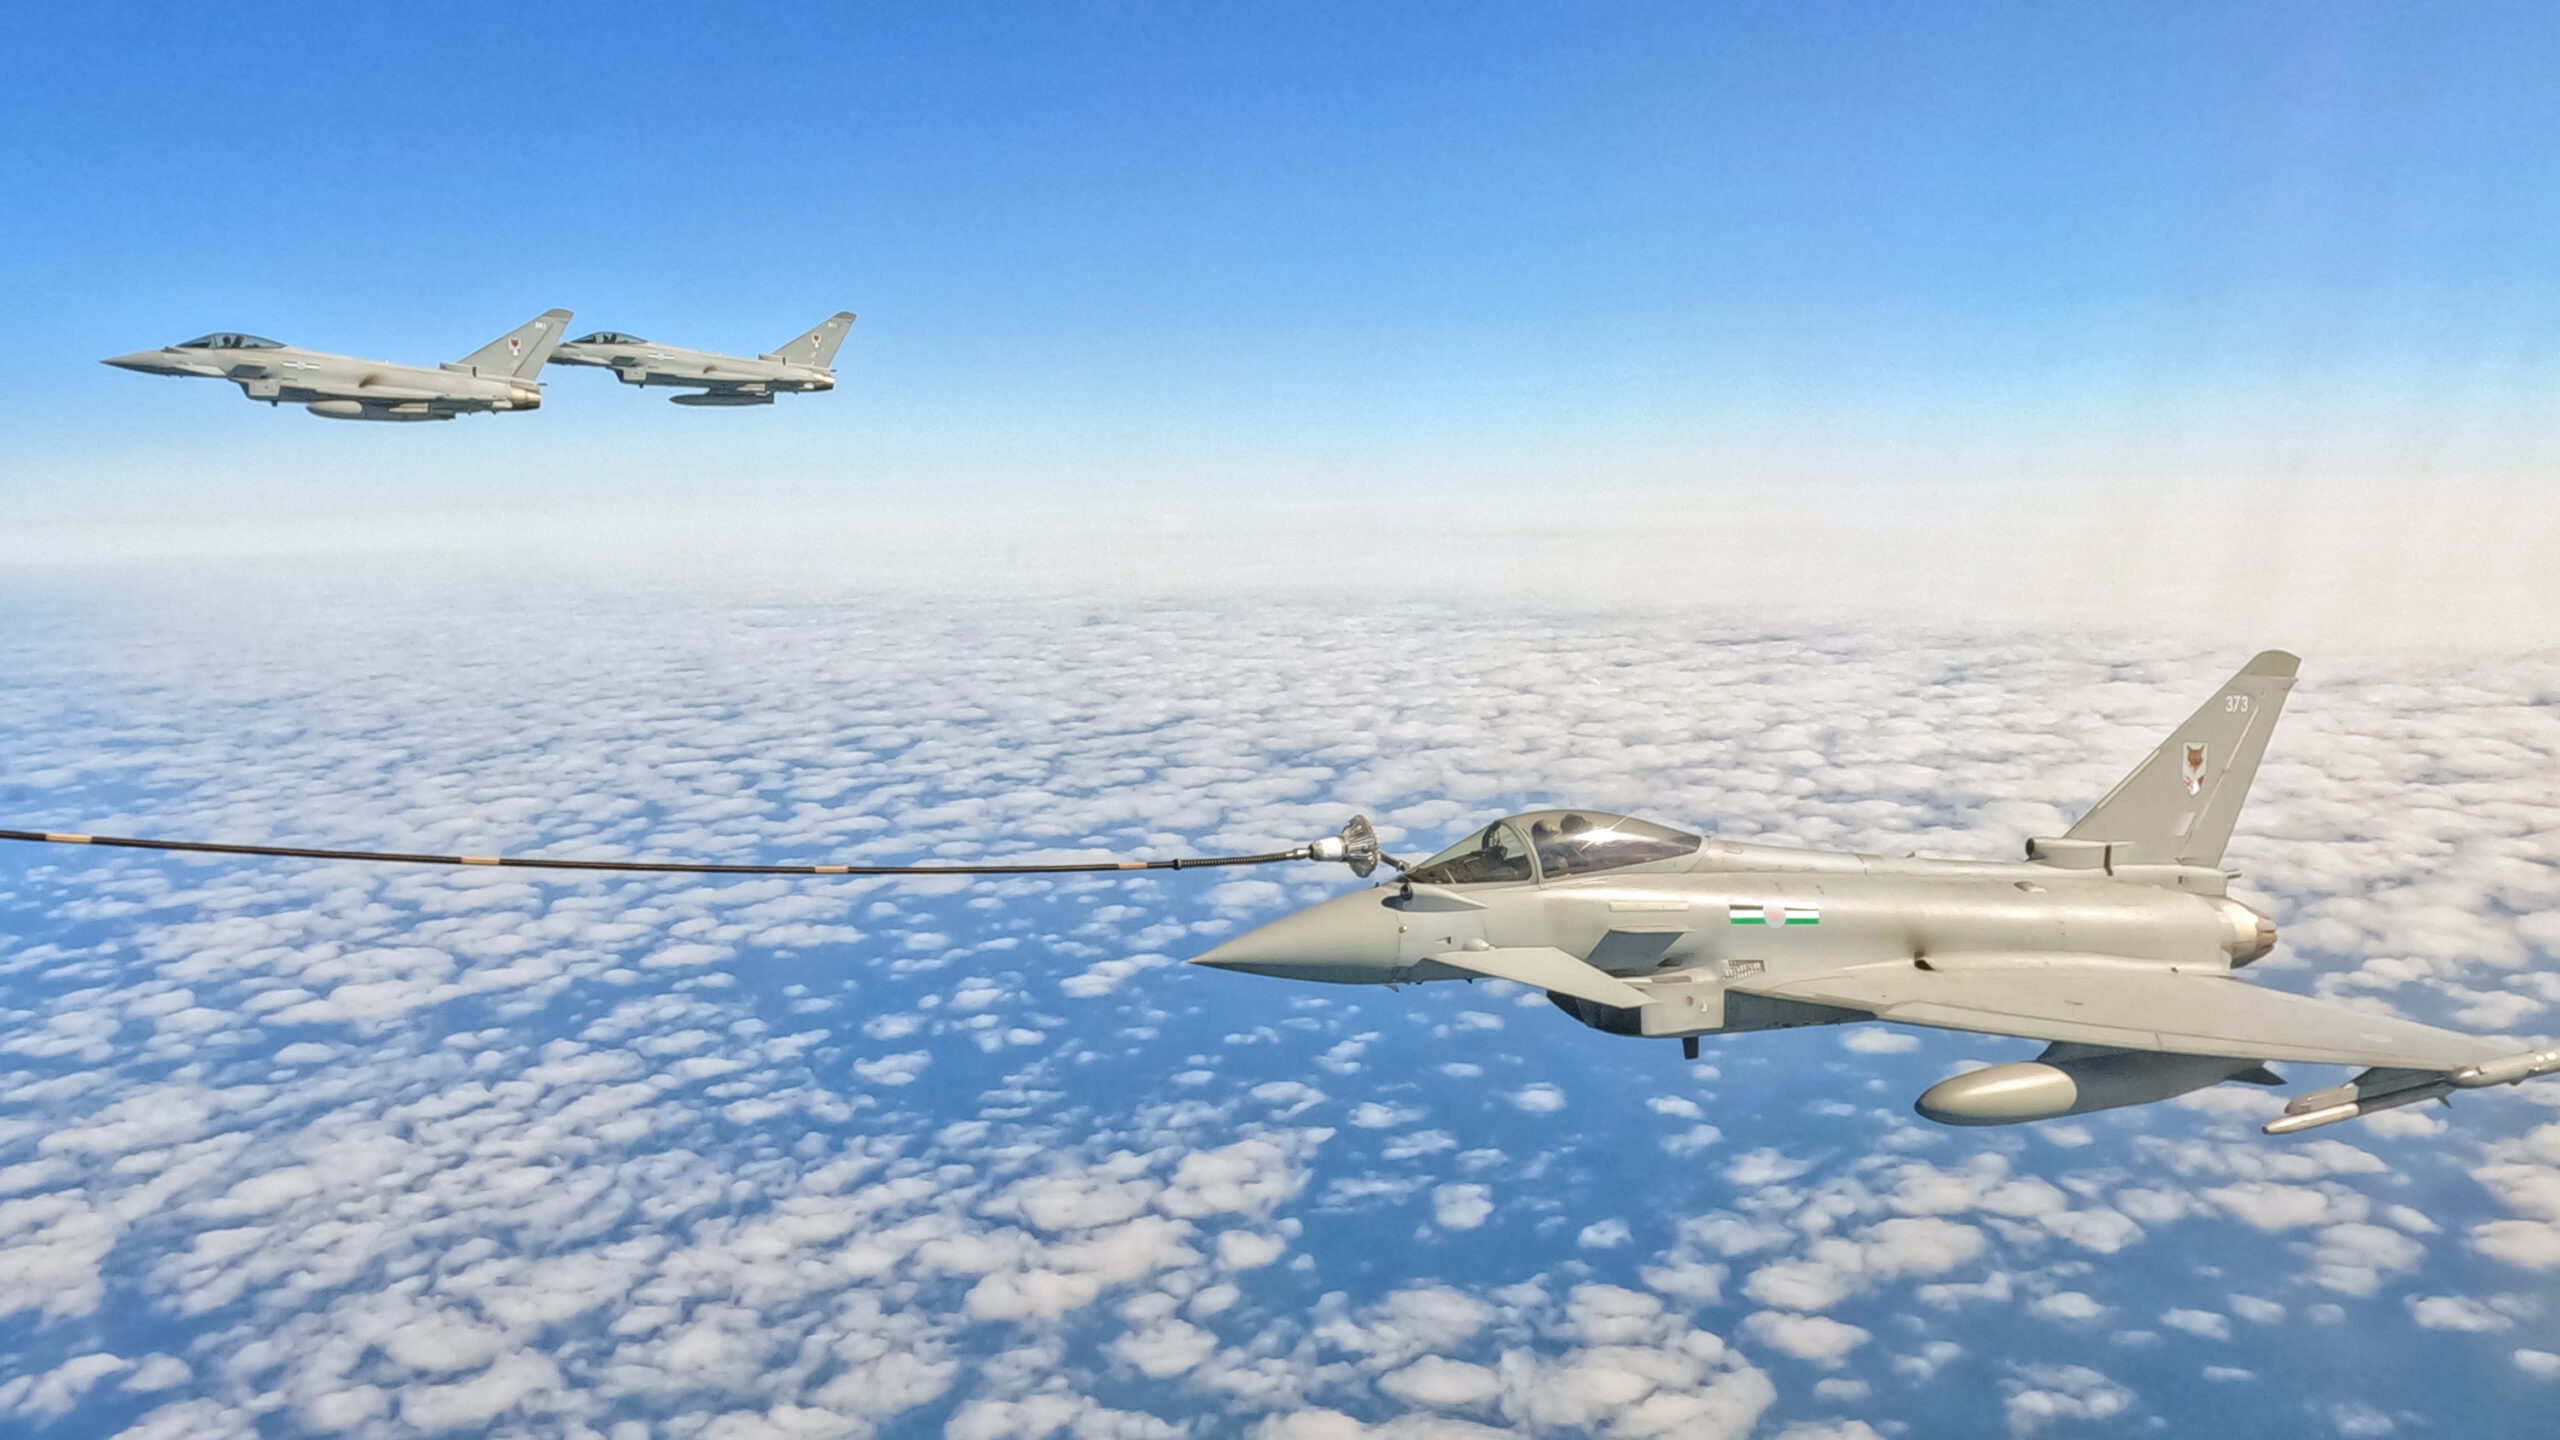 An RAF Typhoon fighter jet with a cable connected to it refuels in-flight over the North Sea. Two other jets can be seen in the background